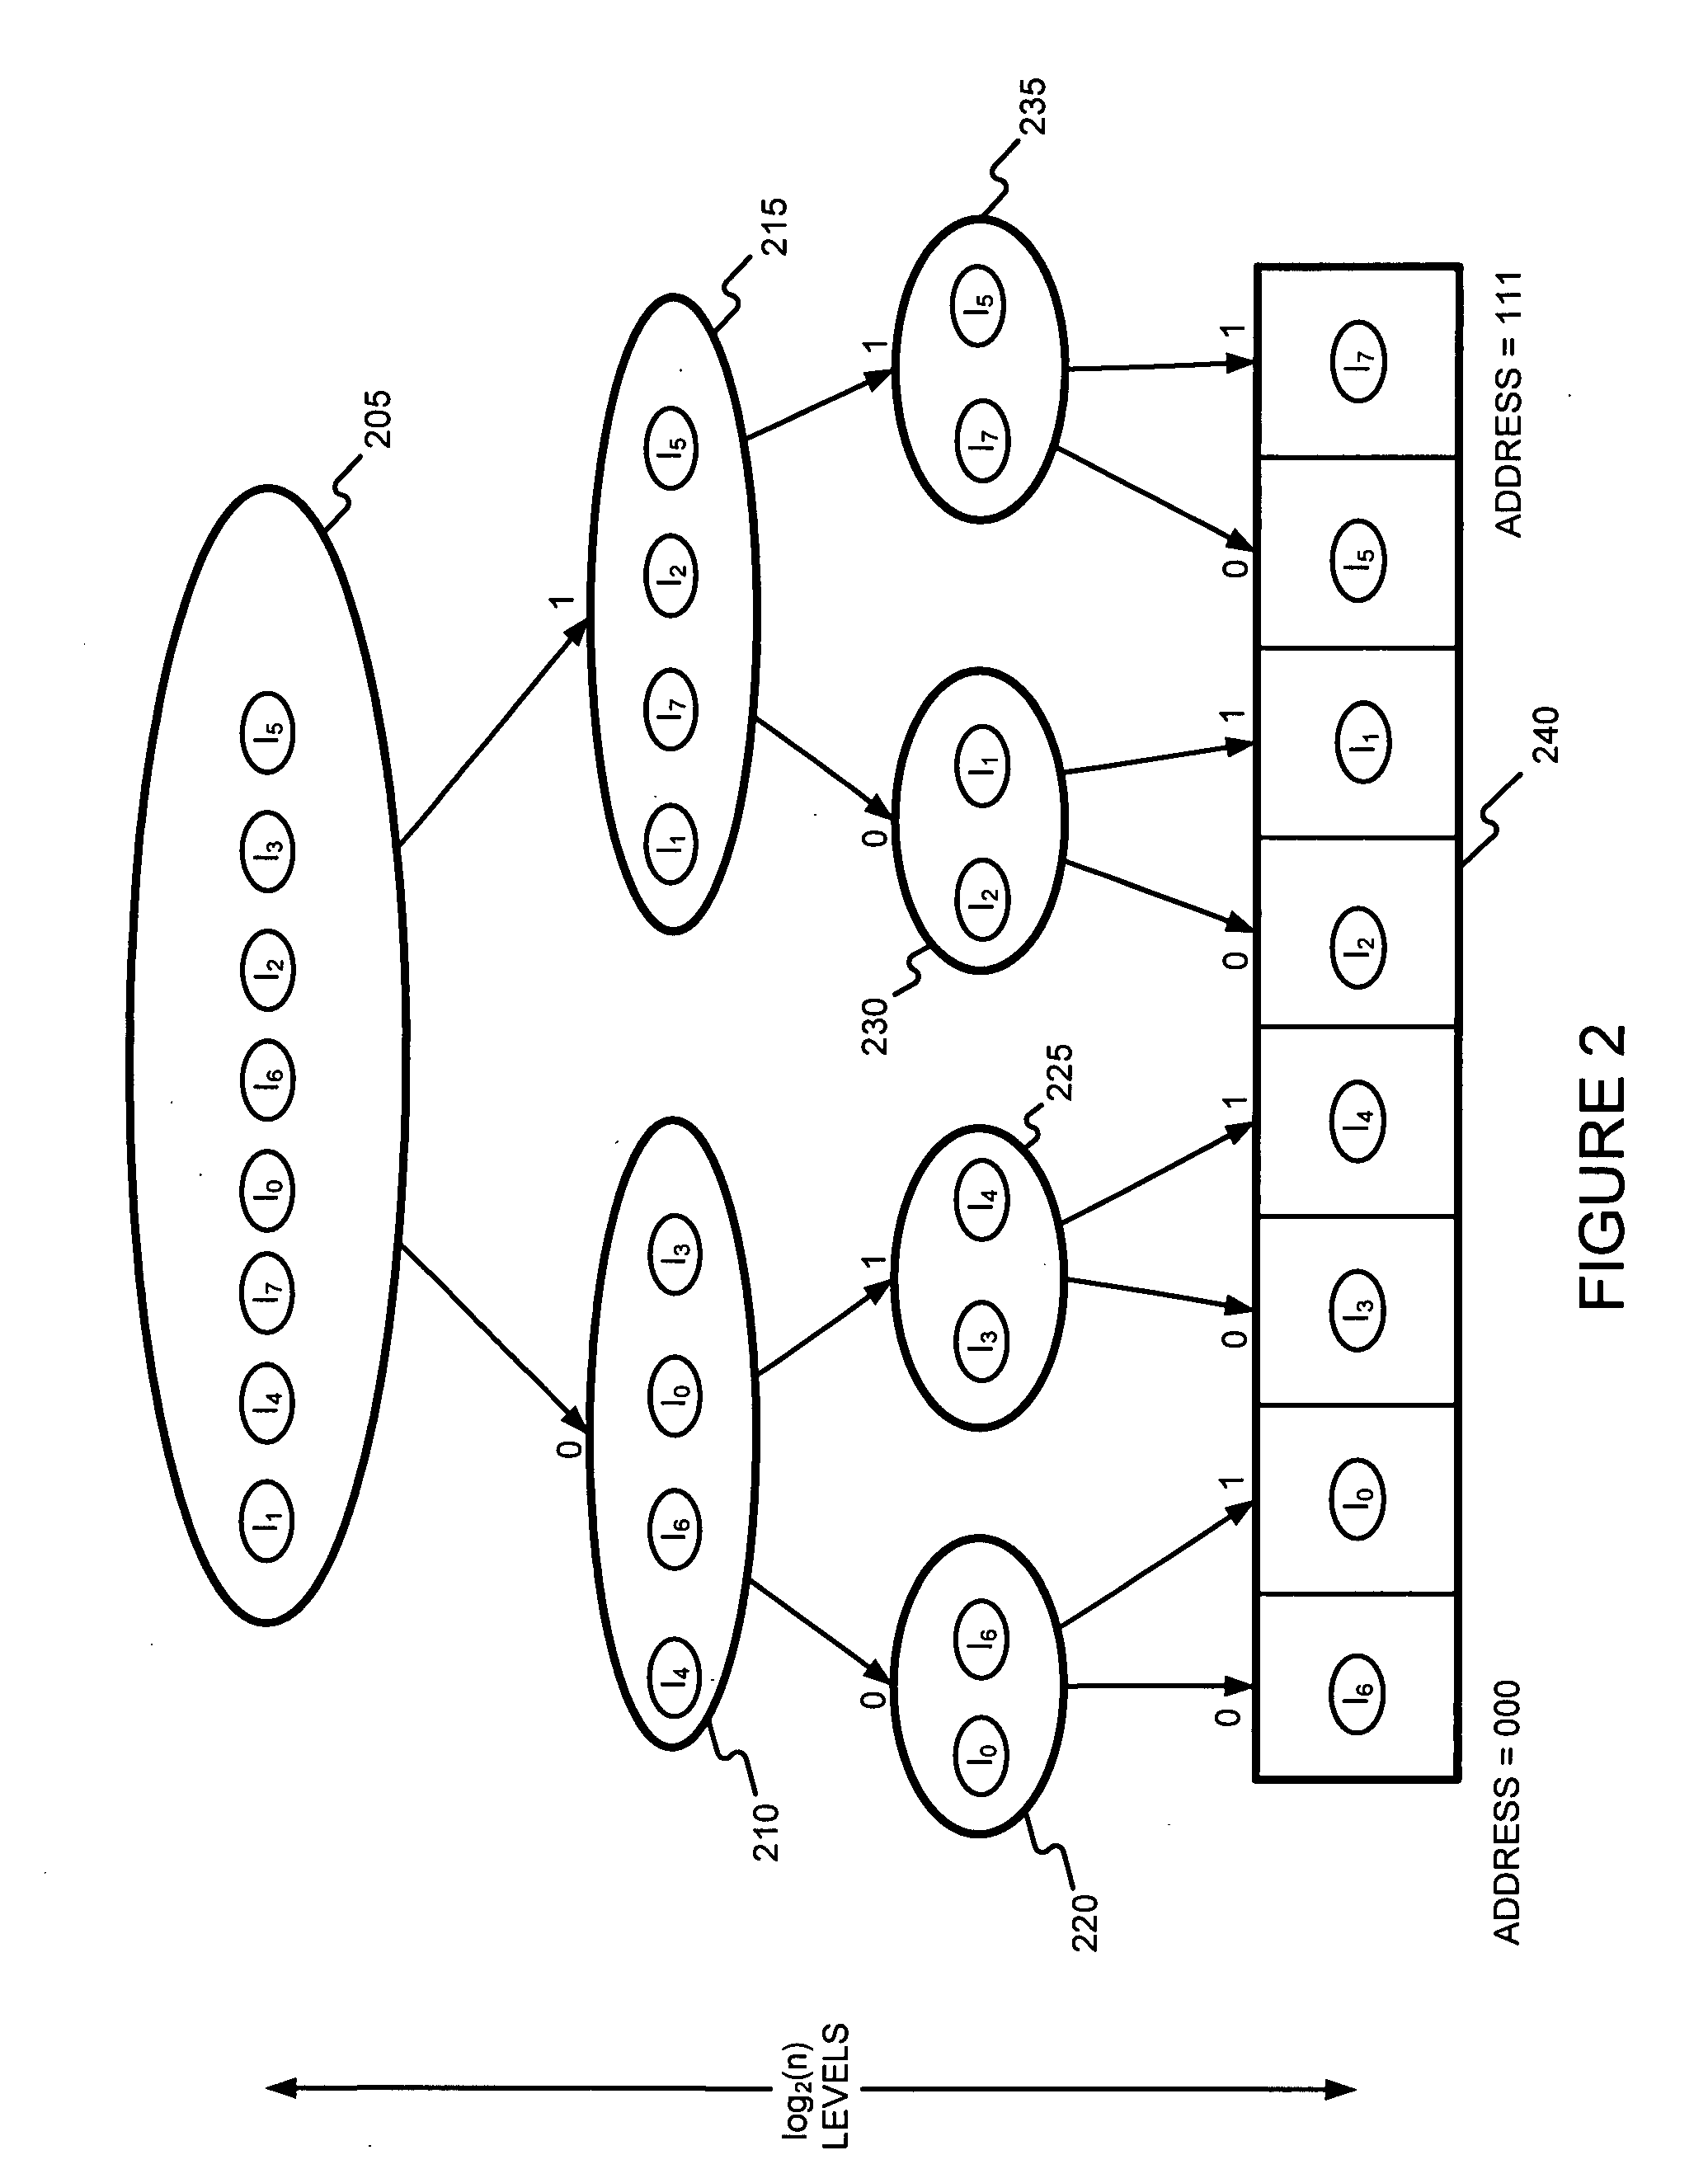 Detecting whether an arbitrary-length bit string input matches one of a plurality of known arbitrary-length bit strings using a hierarchical data structure